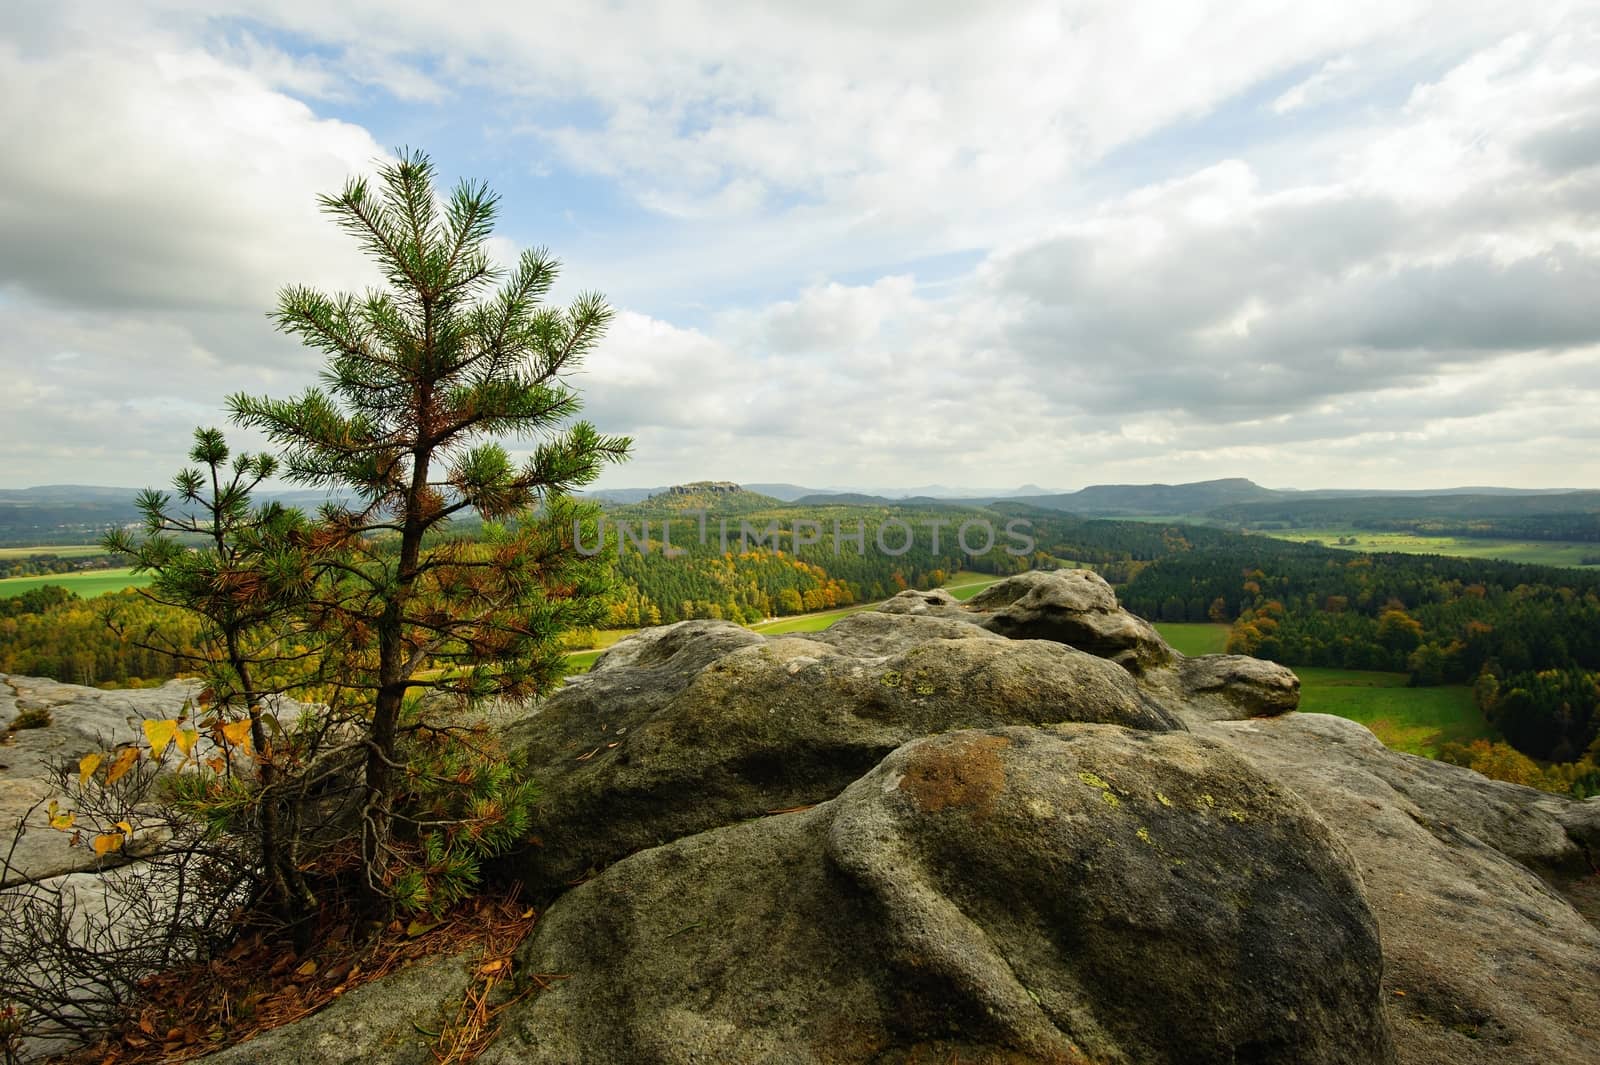 Autumn landscape - rocks, forests - all beautifully colored